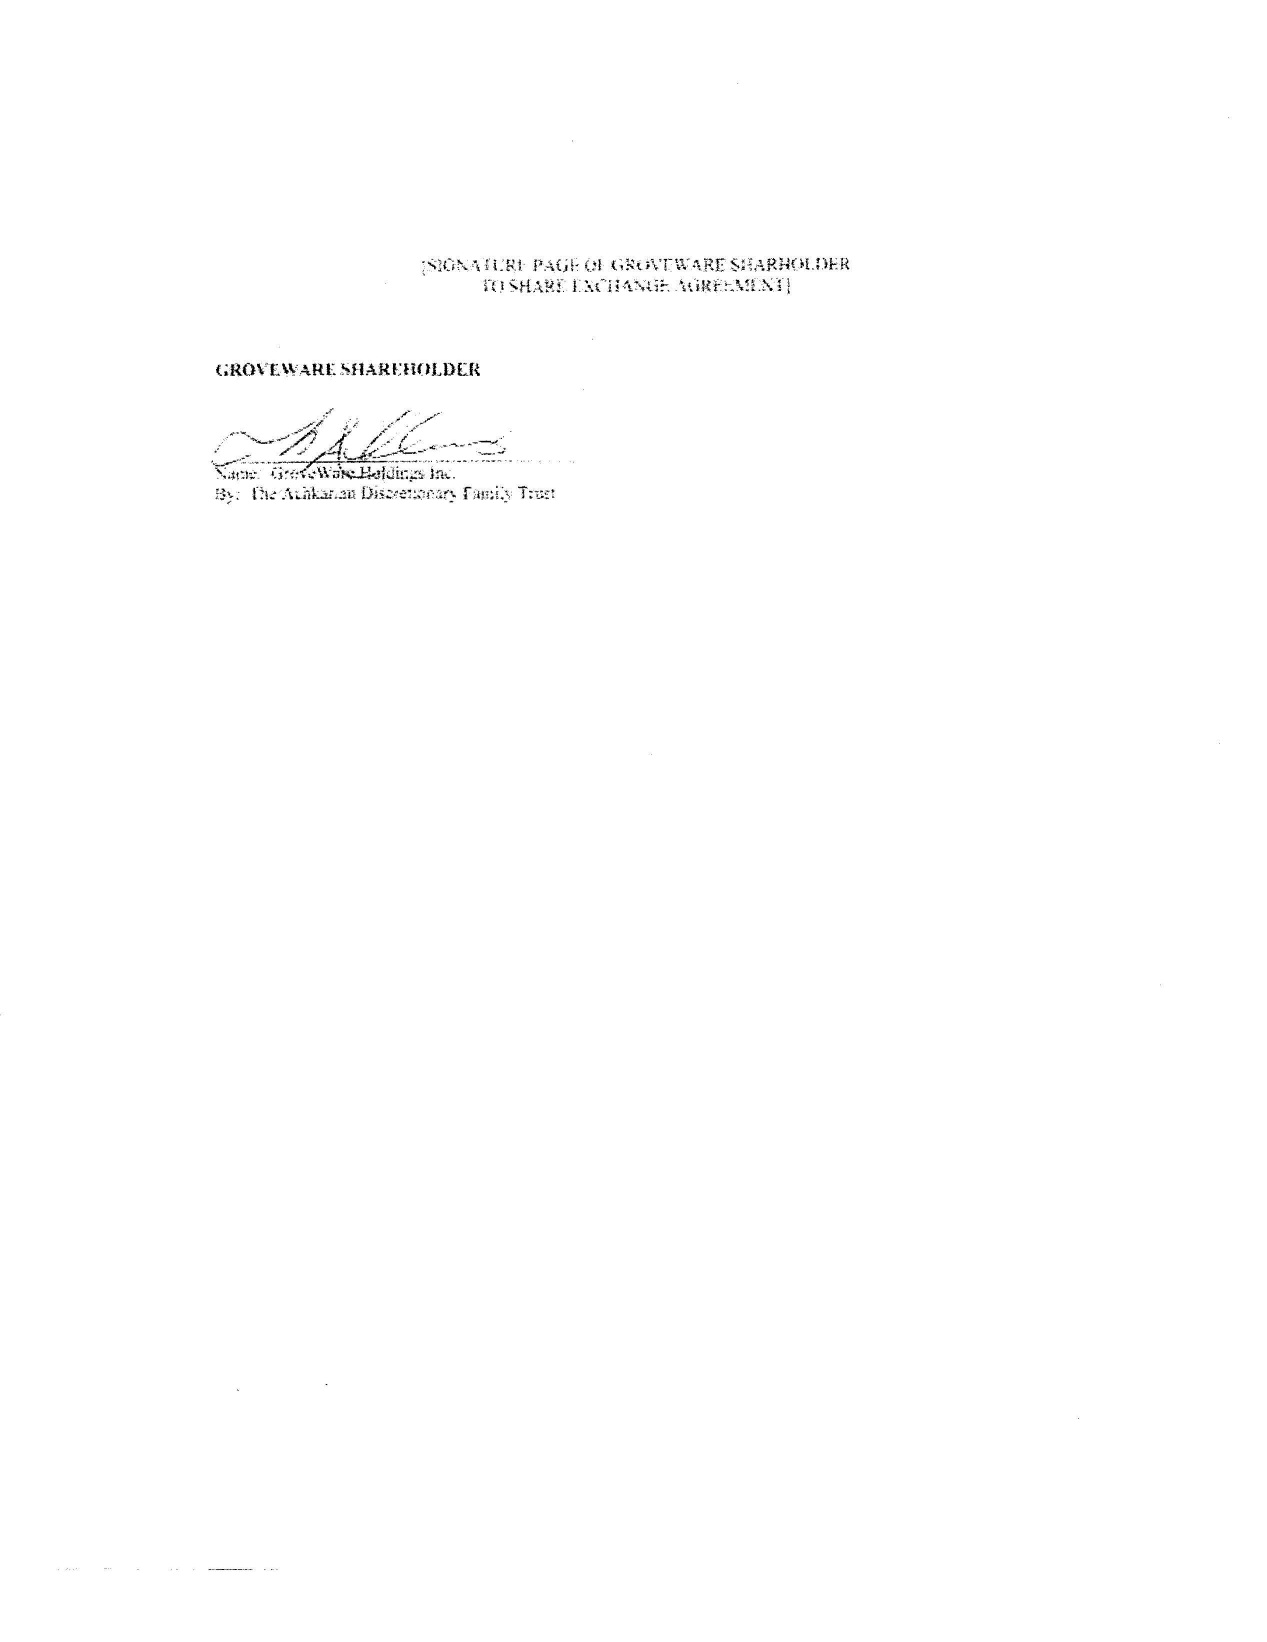 Share Exchange Agreement - Page 17.